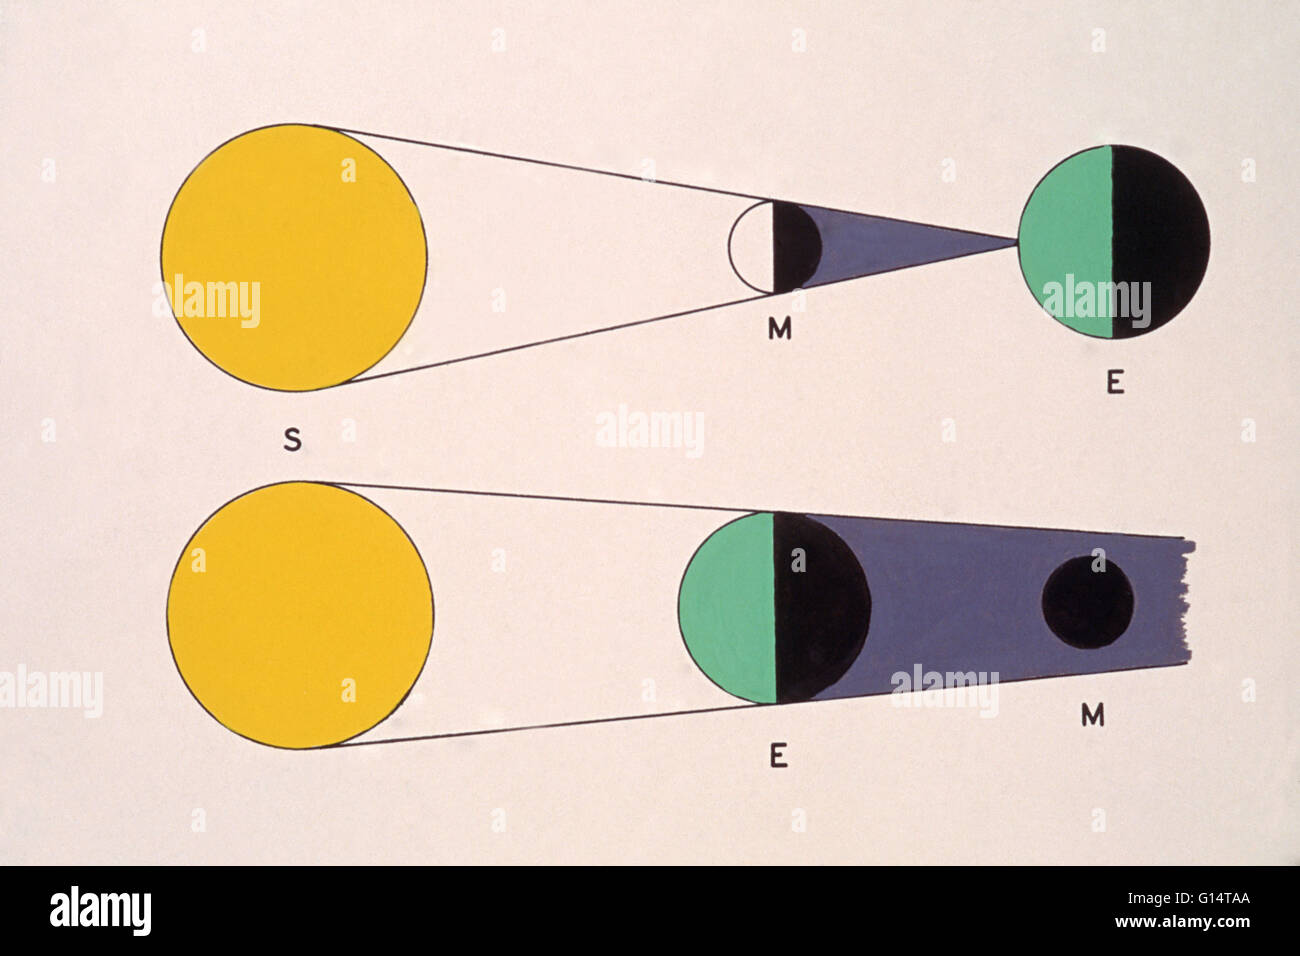 Showing the circumstances for a solar and lunar eclipse. The top illustration demonstrates the needed circumstances for a solar eclipse, and the bottom for a lunar eclipse. Stock Photo